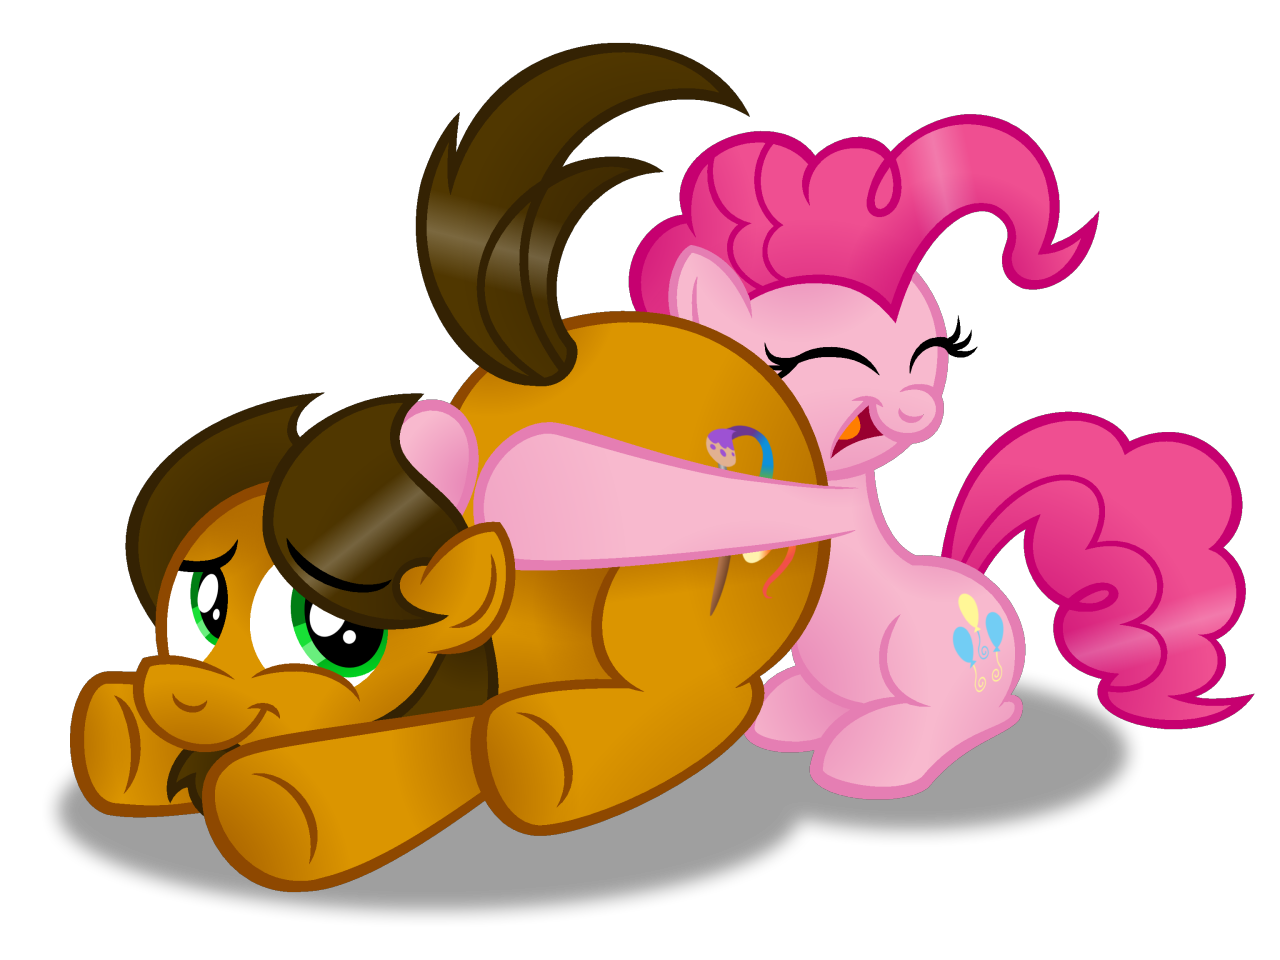 artist-pony-alex:  Pinkie:  OMIGOSH IT’S SO CHUBBY AND PLUMP AND ADORABLE AND